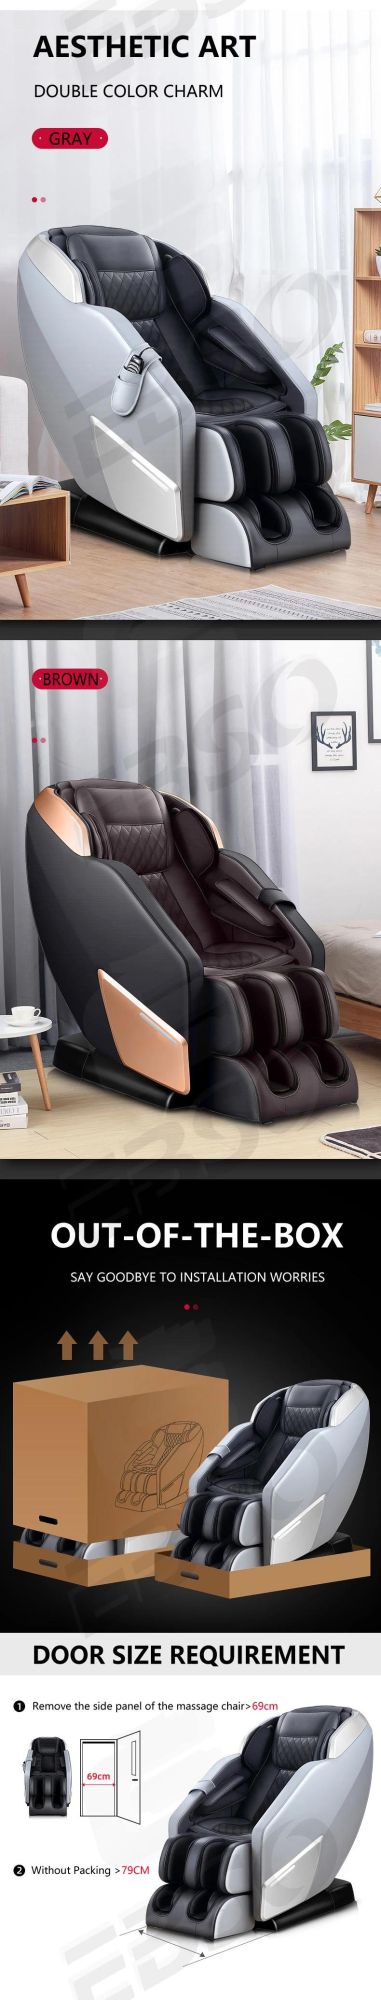 2021 New Design Automatic Full Body Zero Gravity Massage Chair with Heating